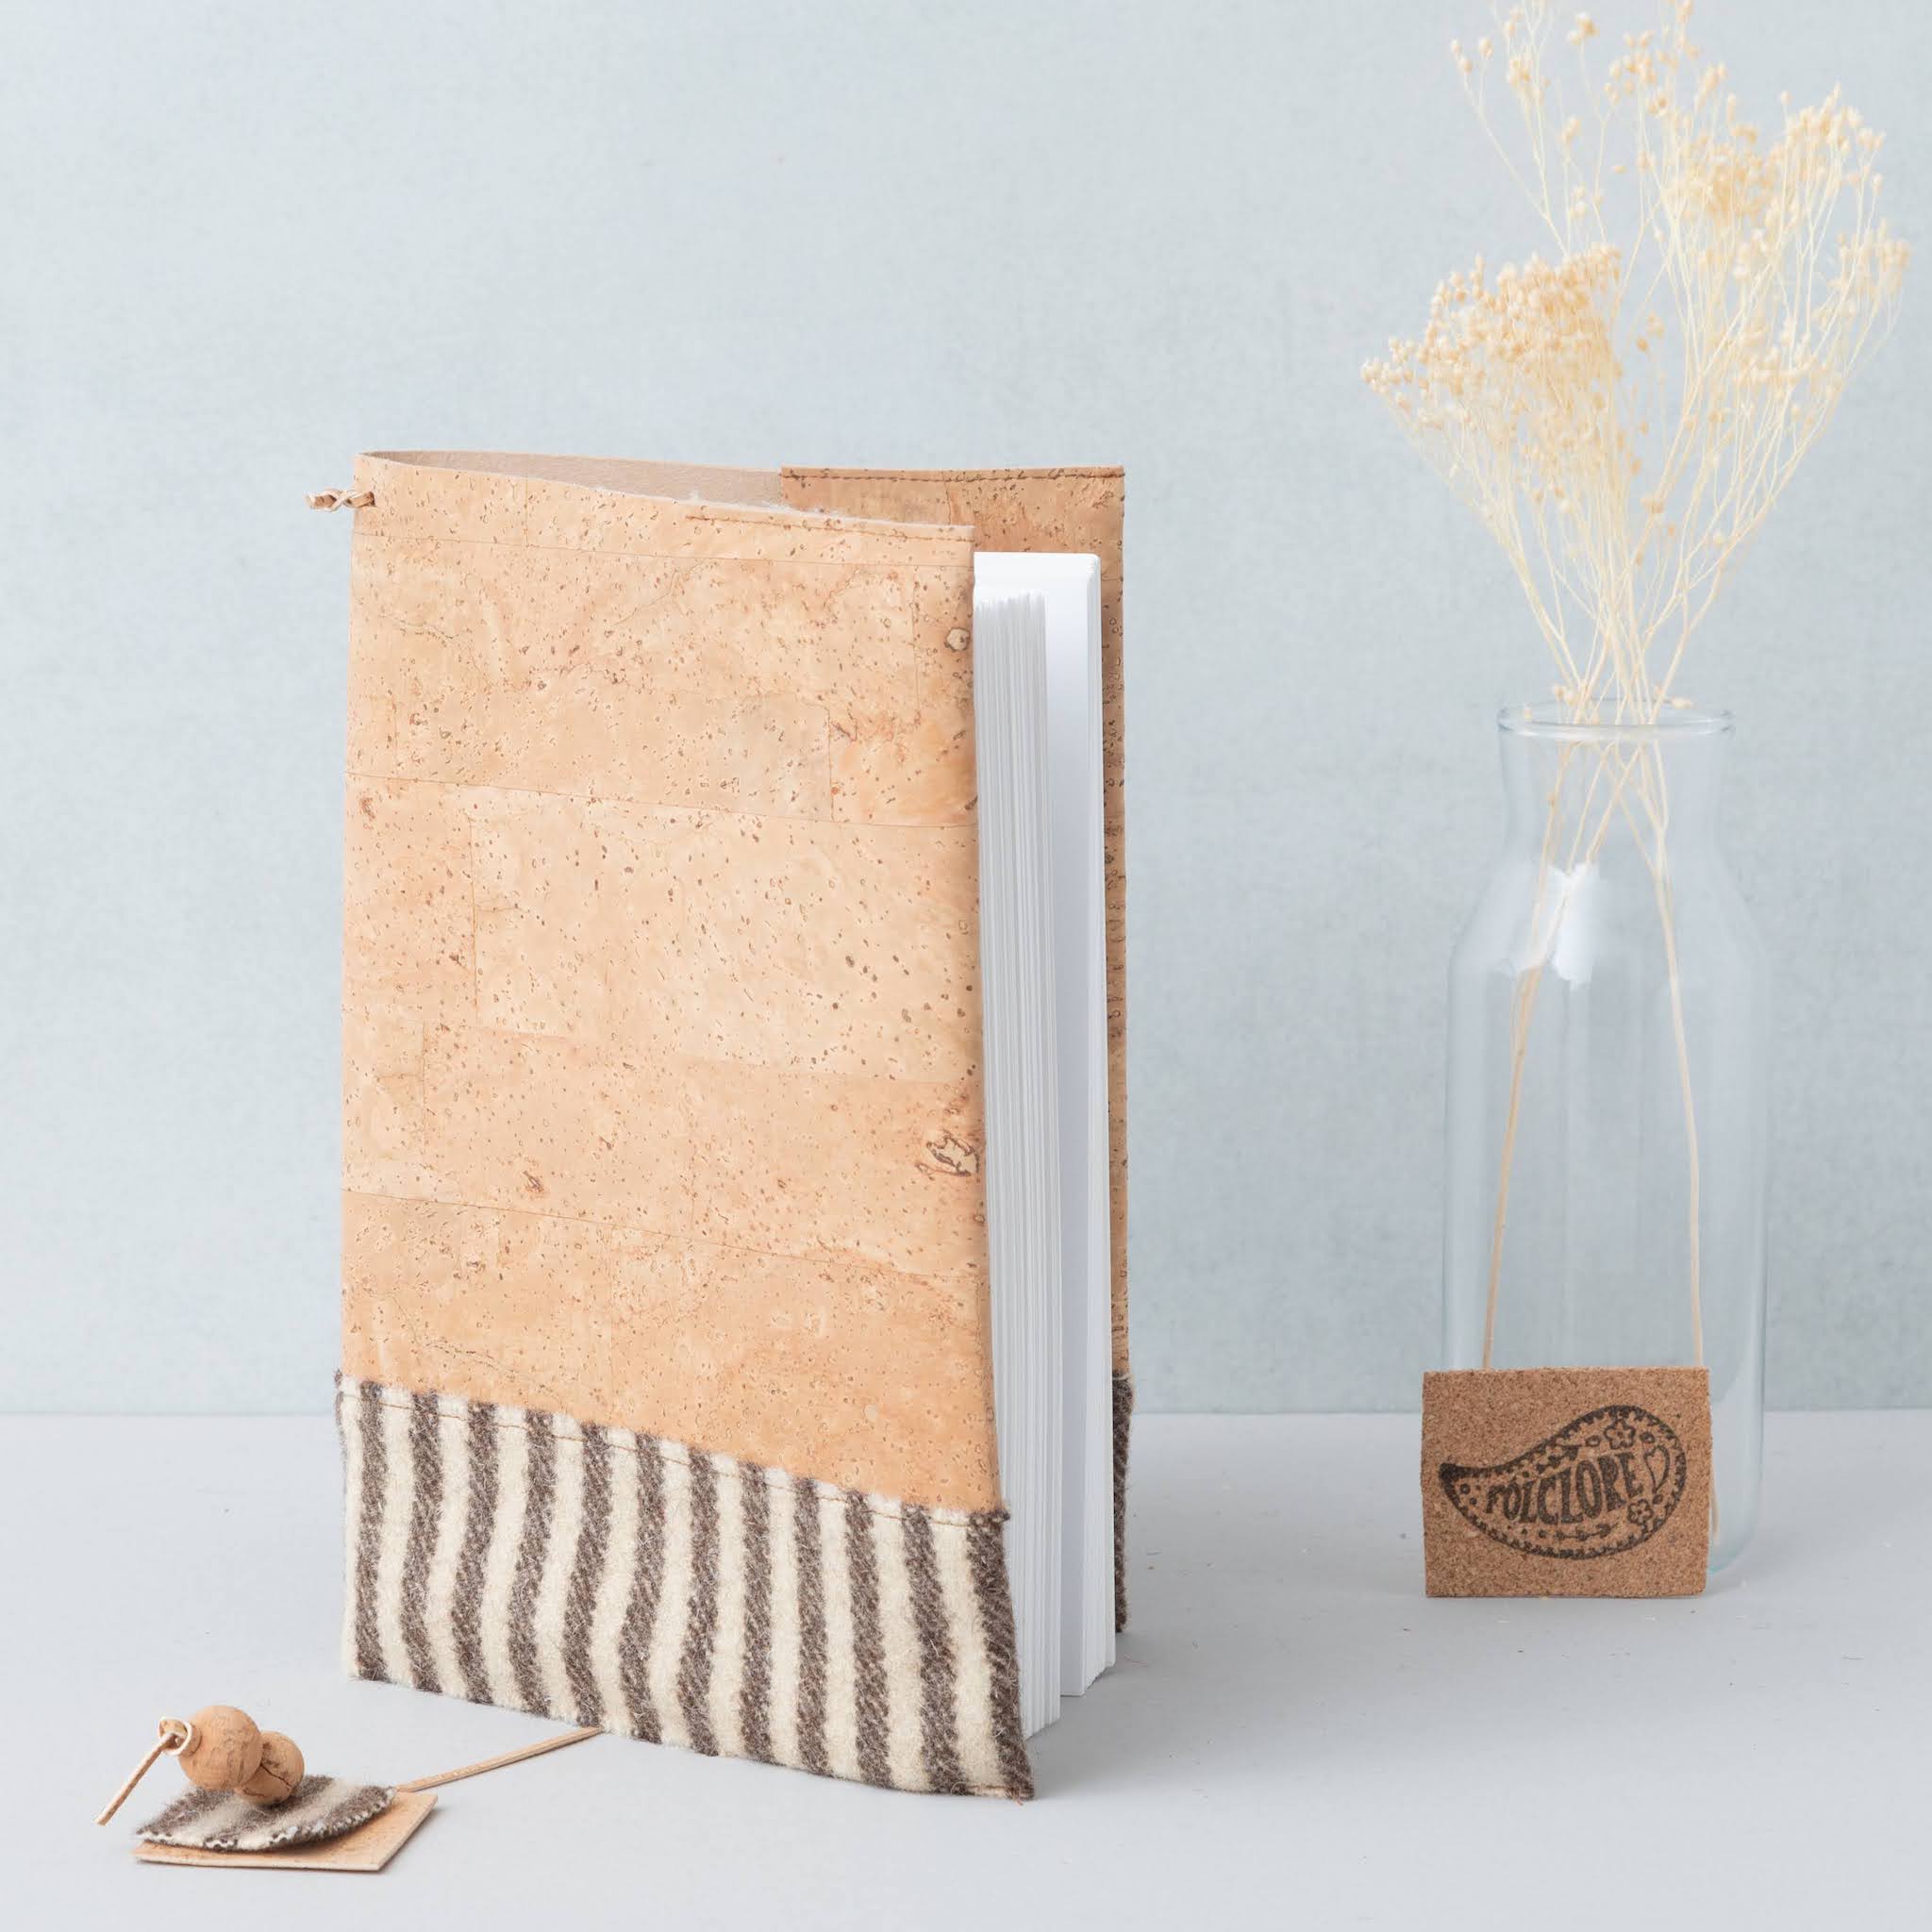 natural cork leather and striped bile handcrafted book cover